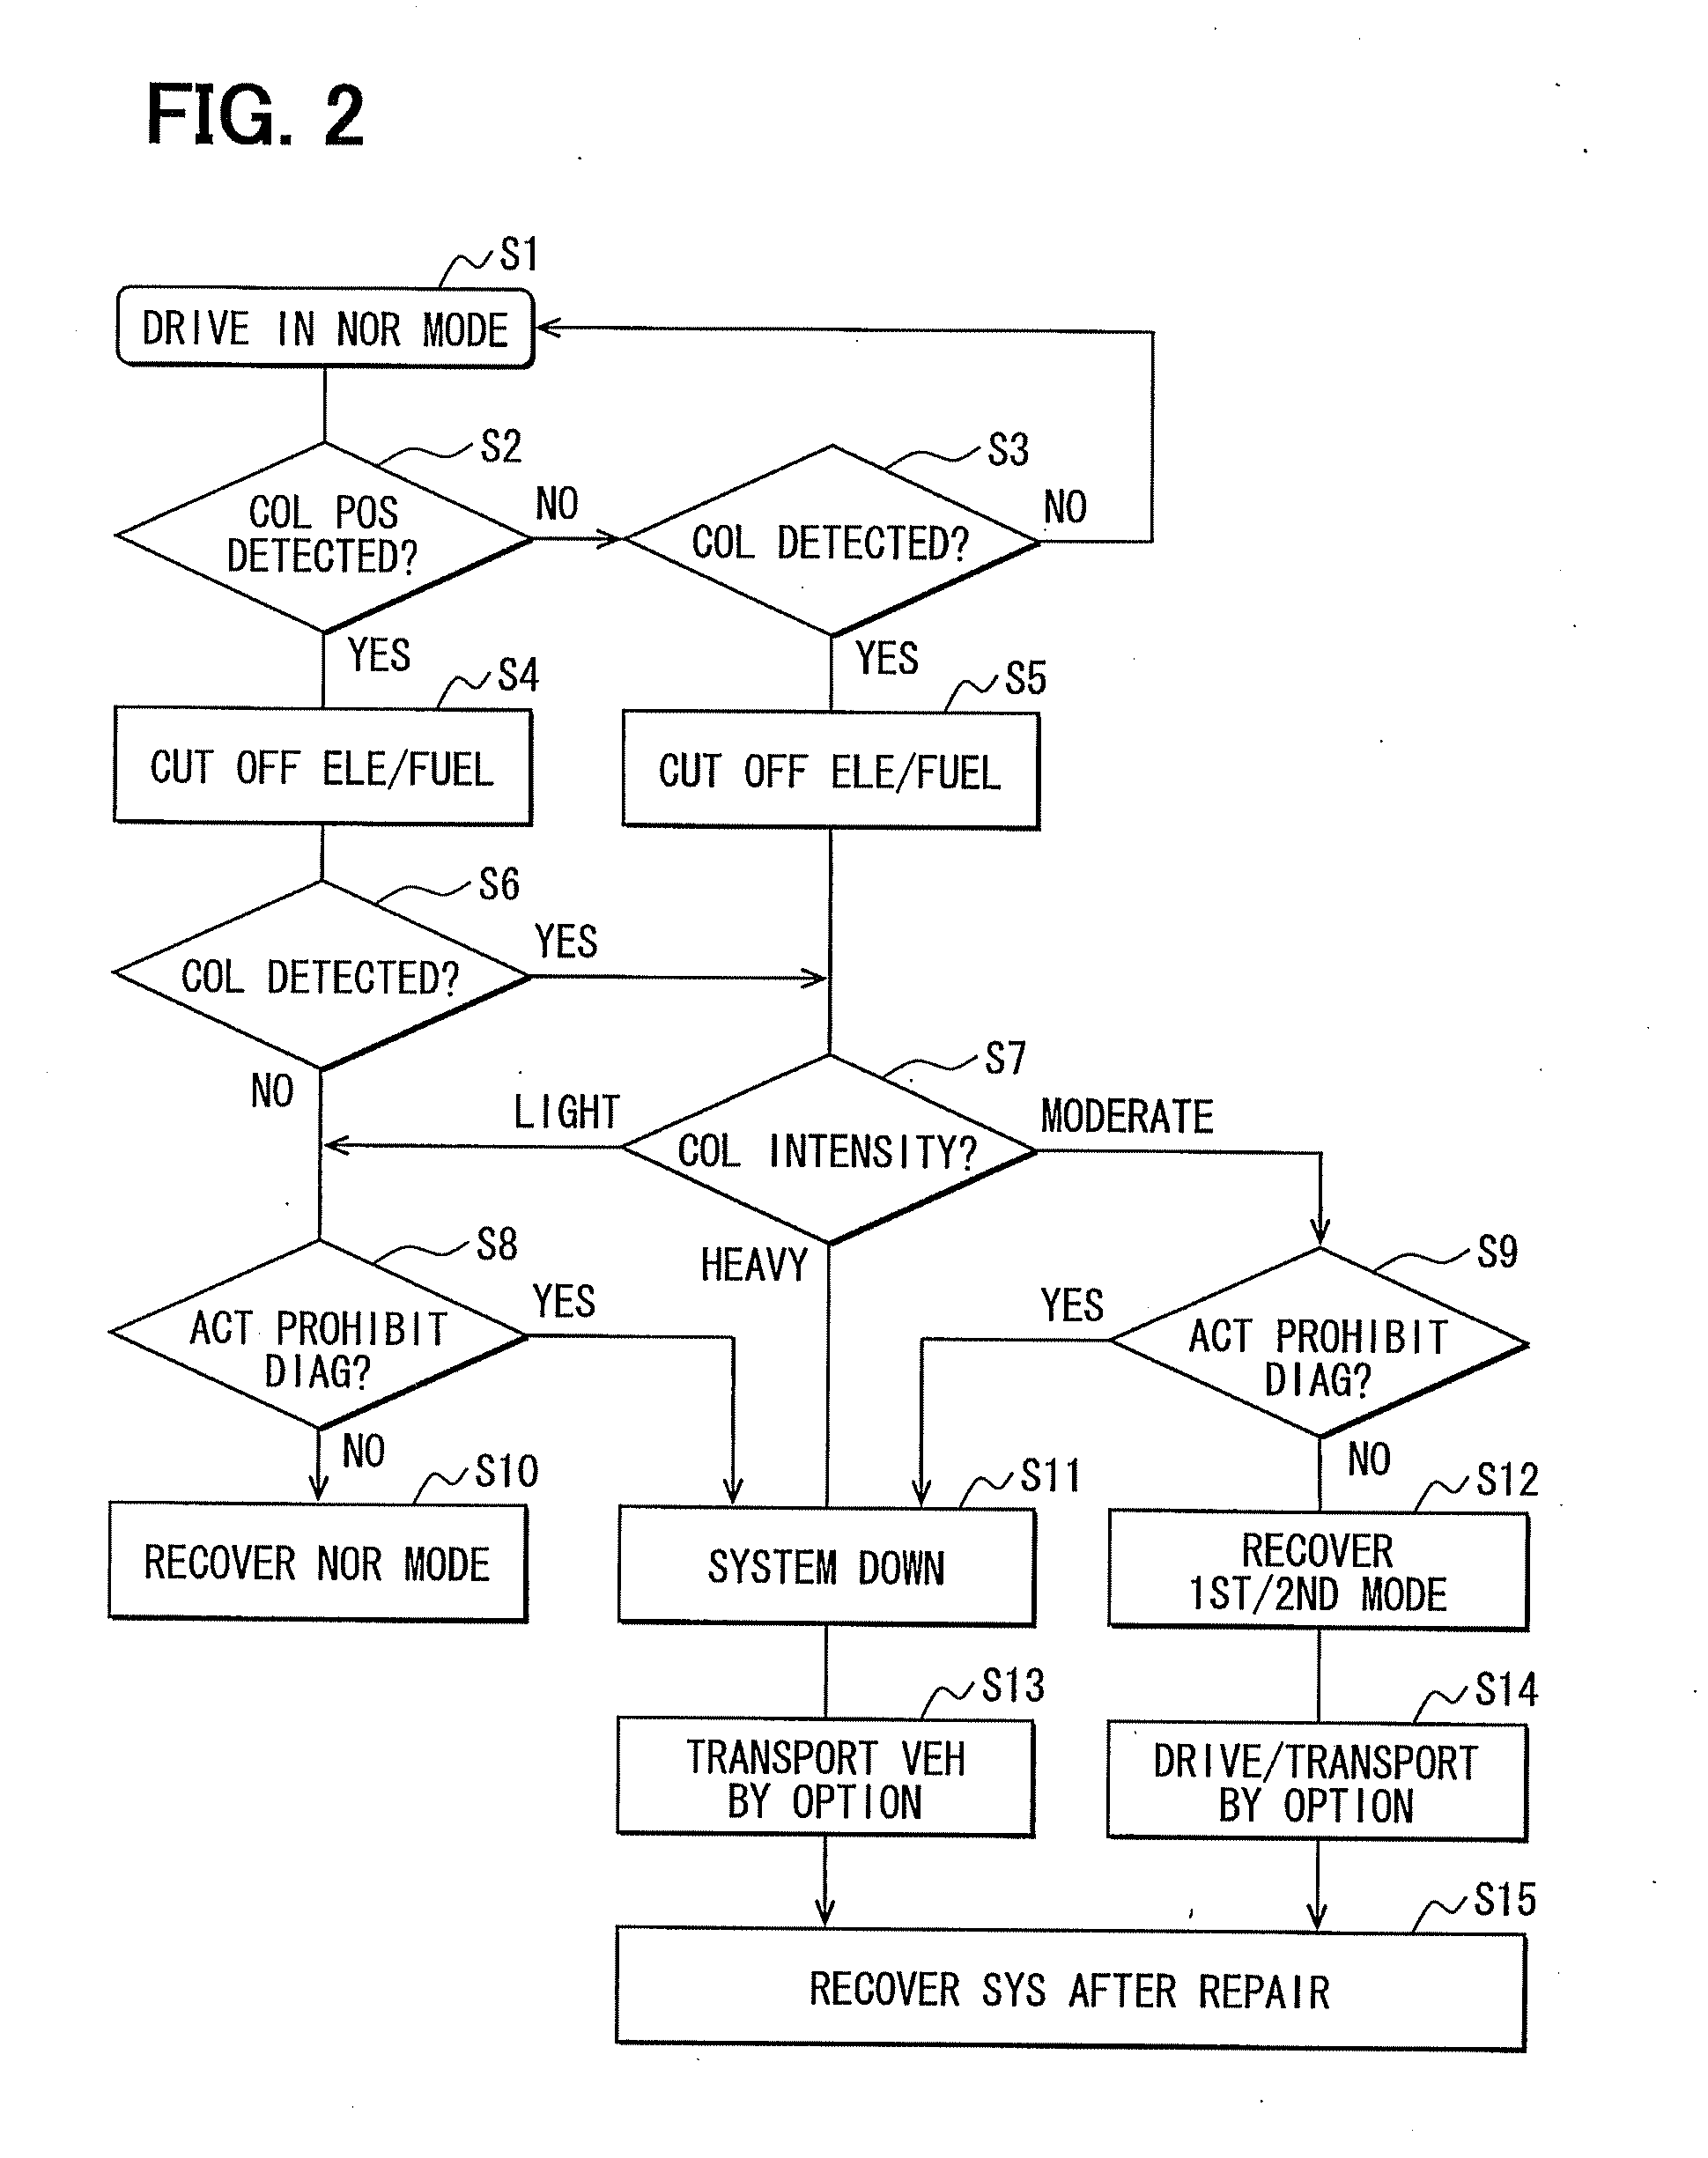 In-vehicle apparatus for detecting collision of vehicle